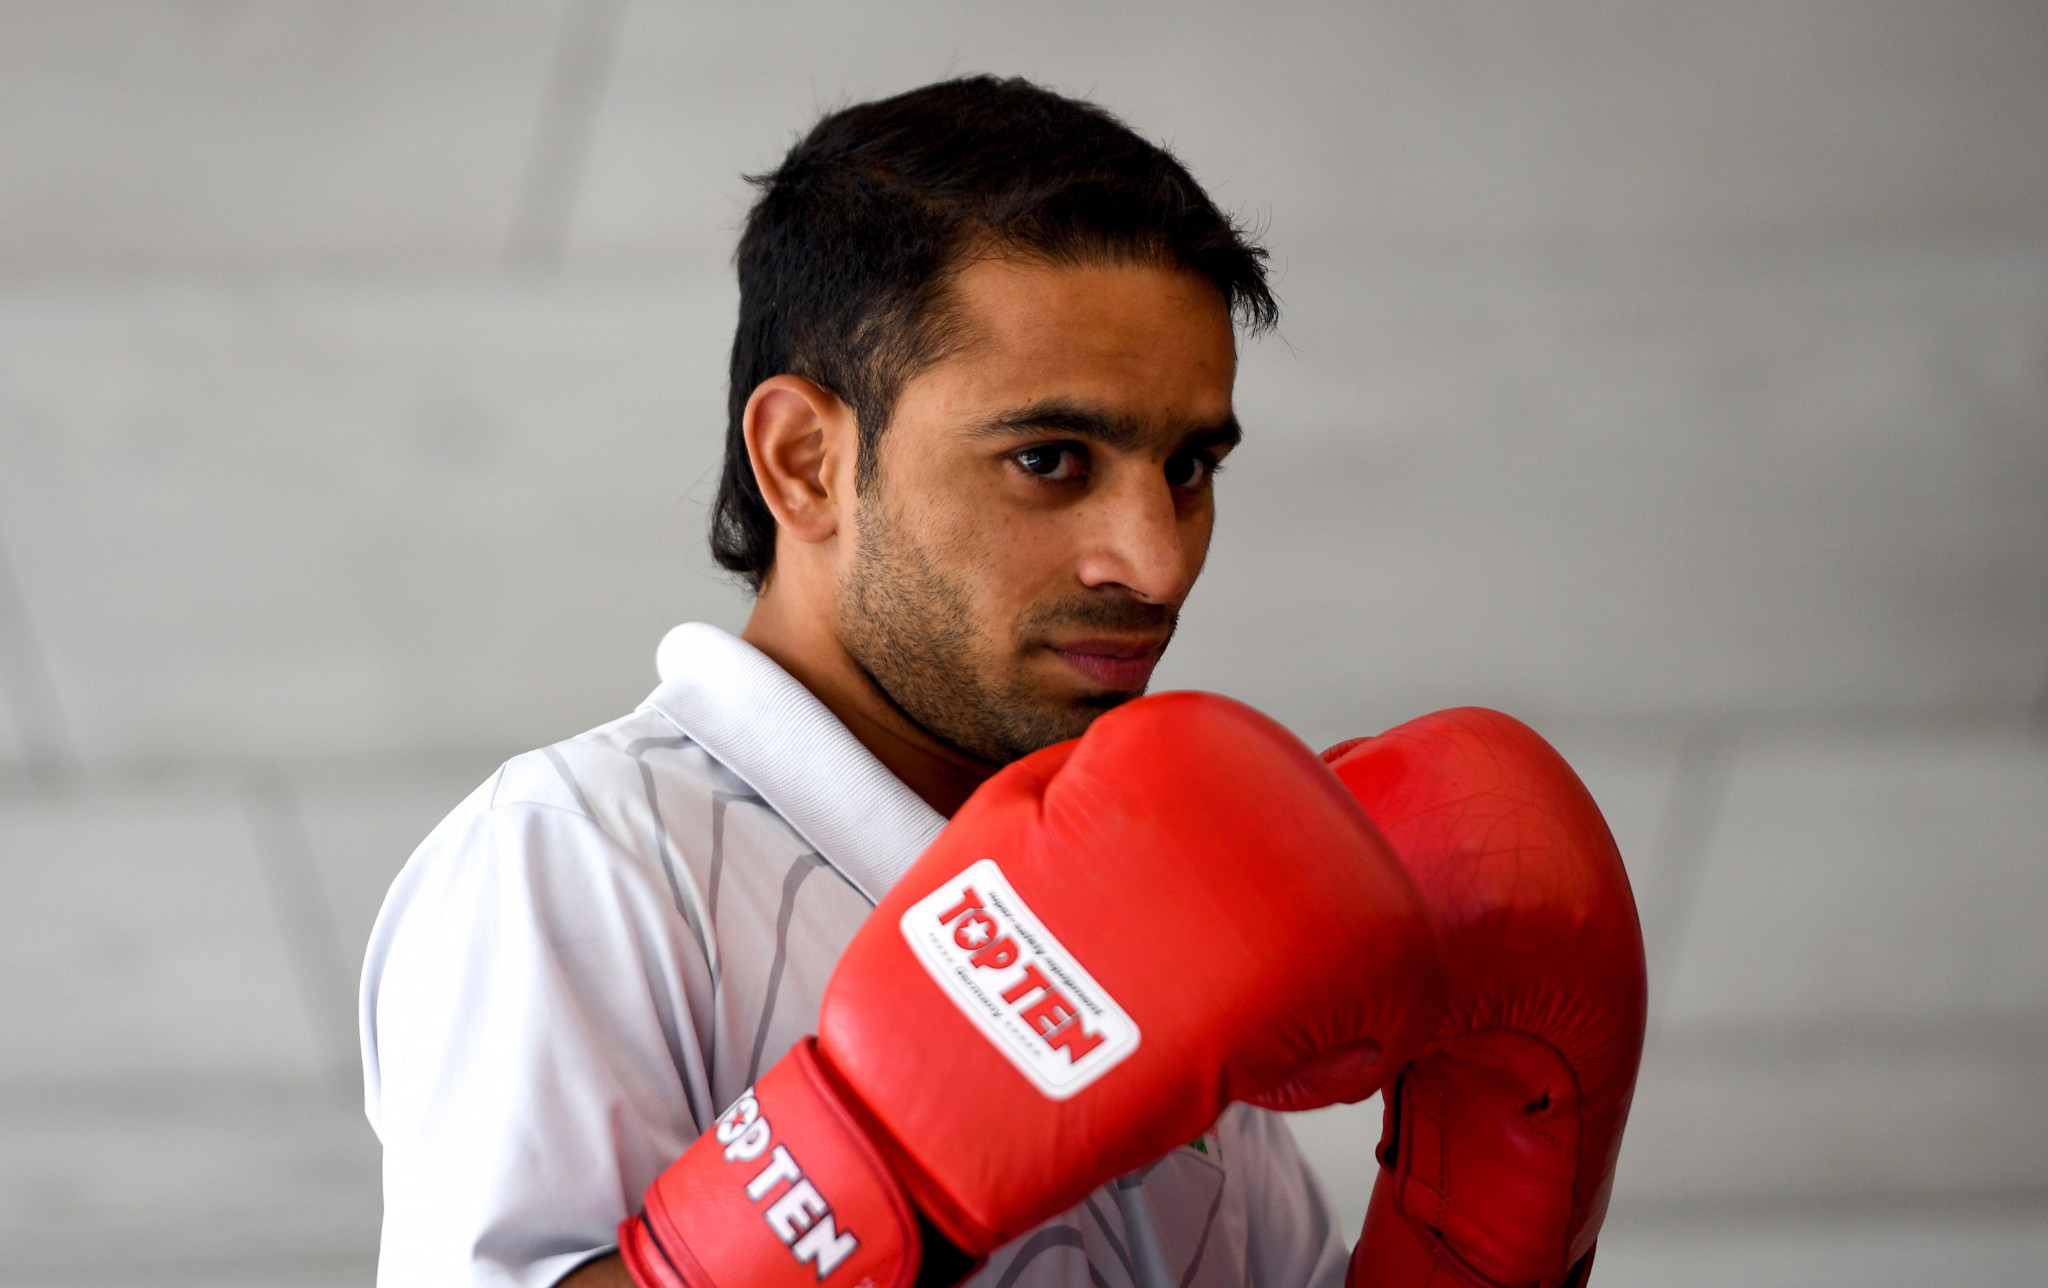 Boxer Amit Panghal is among the Indian athletes to have spoken out against boycotting Birmingham 2022 ©Getty Images